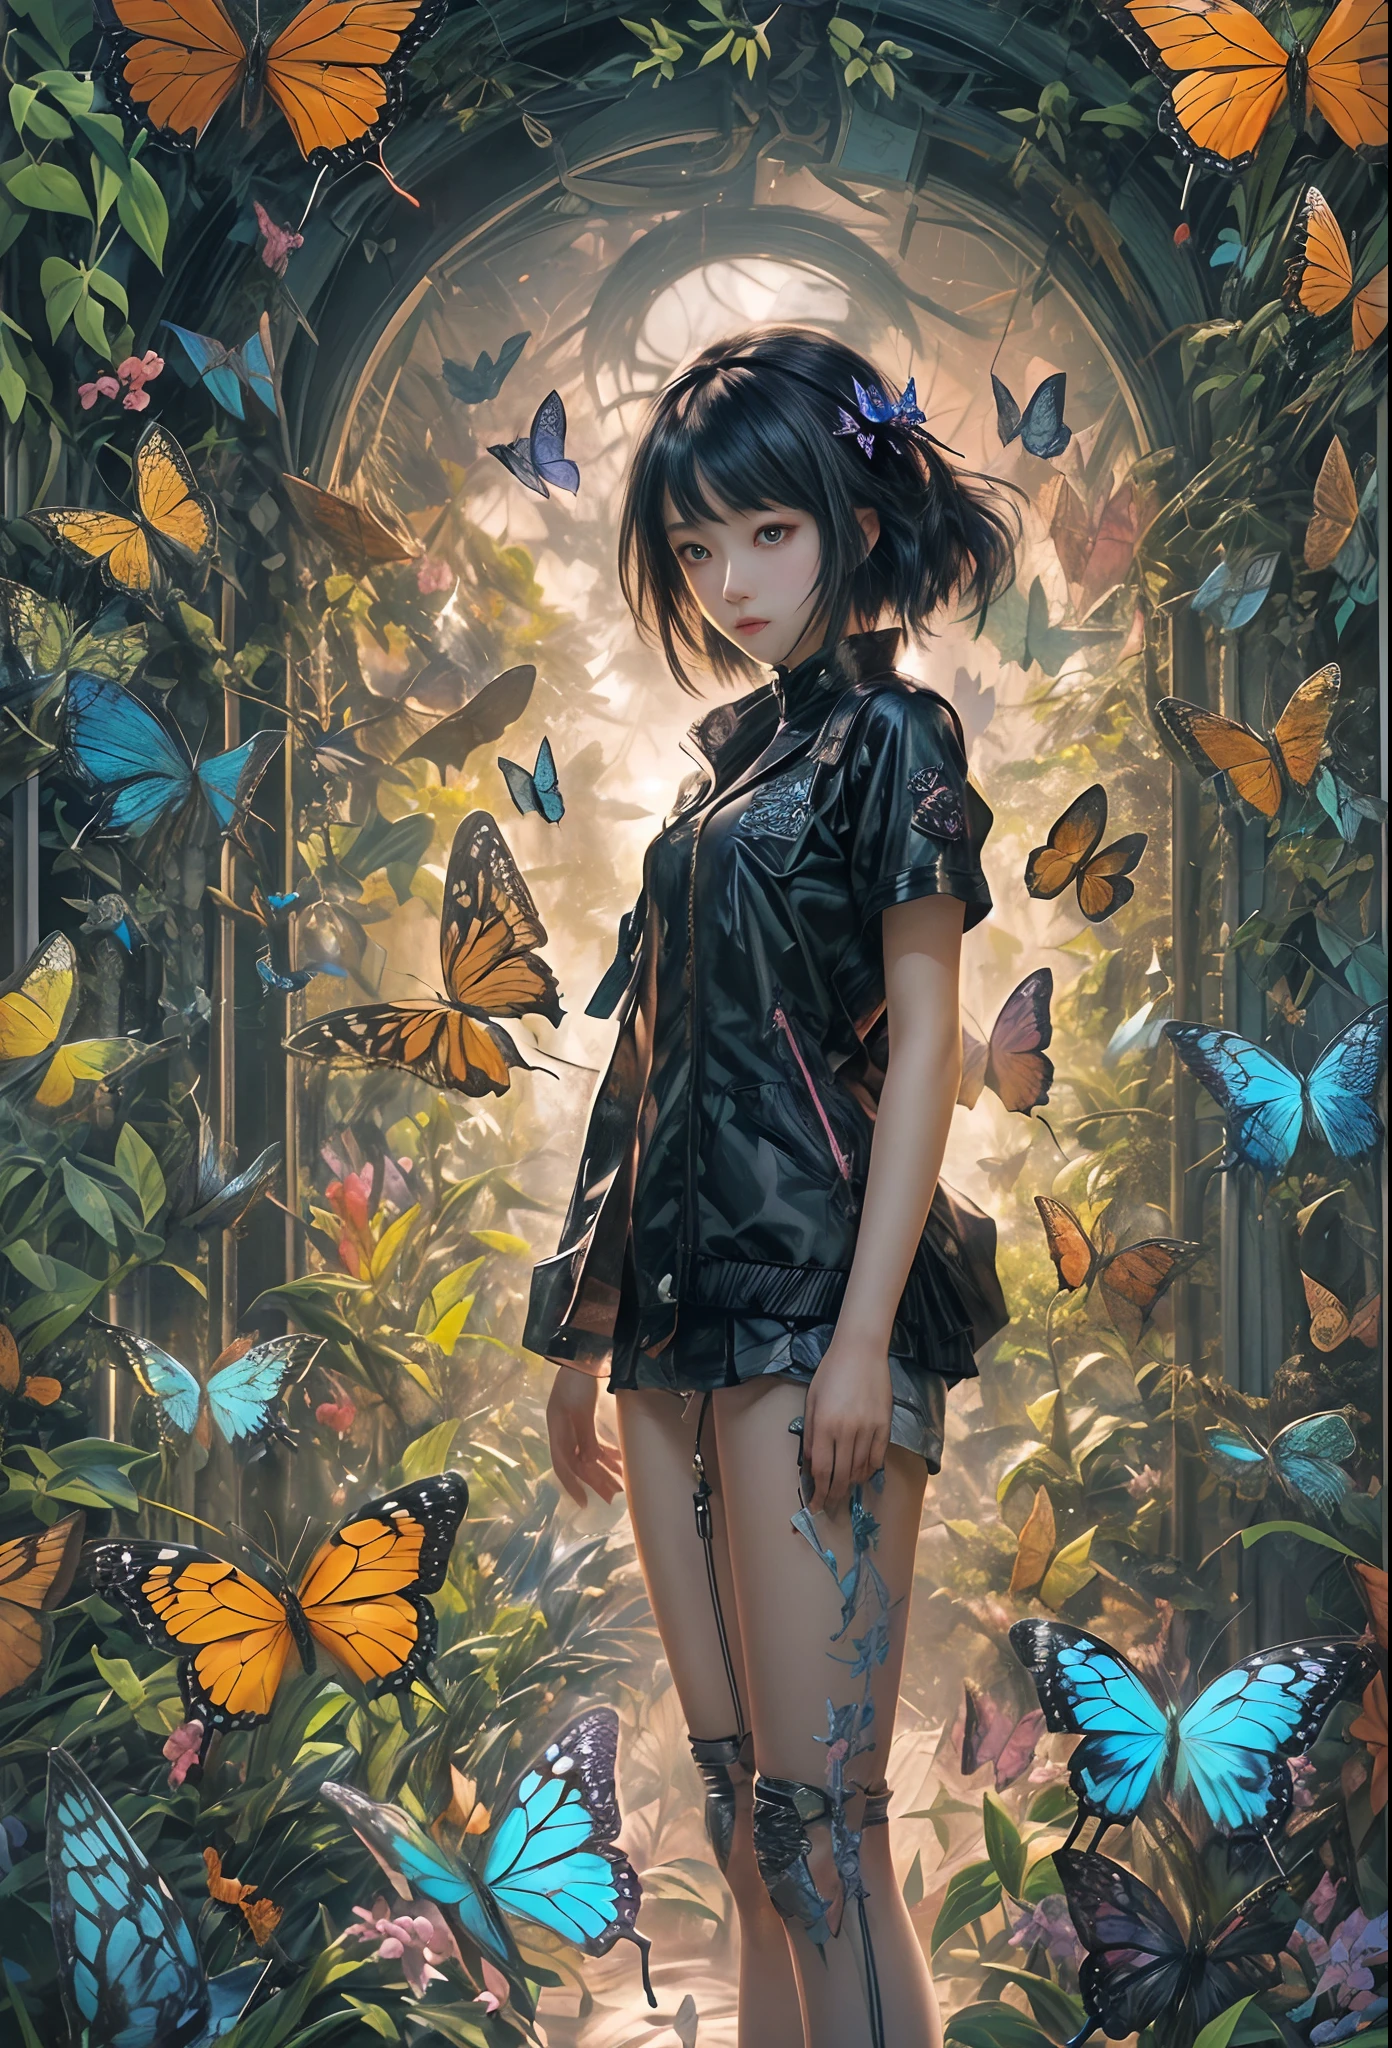 masterpiece, concept art, medium shot, centered, a girl standing in front of a wall of butterfly's, insectarium, cyberpunk art, by Torii Kiyomasu, girl with black hair, james jean style, many eyes on head, official anime still, anime visual of a young girl, chiaki nanami, epic album art cover, atlus, 2 0 2 0 s promotional art, (epic composition, epic proportion), HD